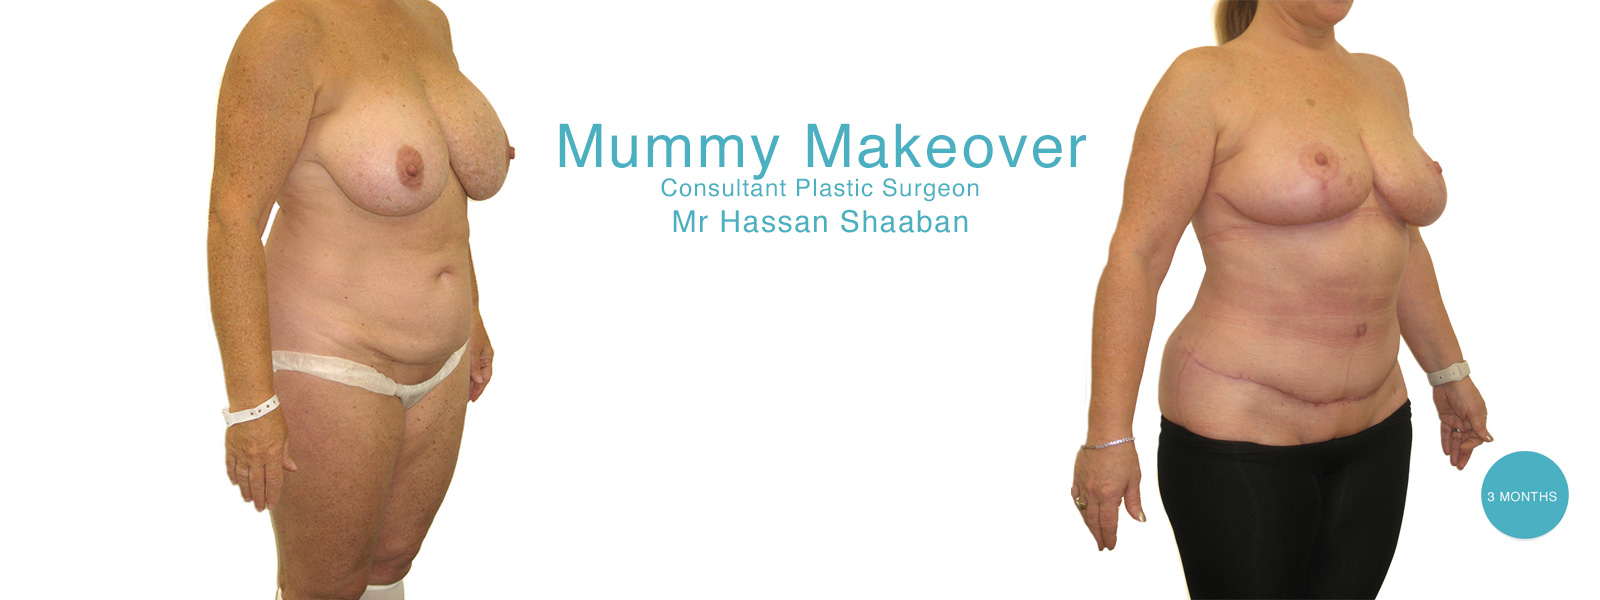 mummy makeover before and after surgery 